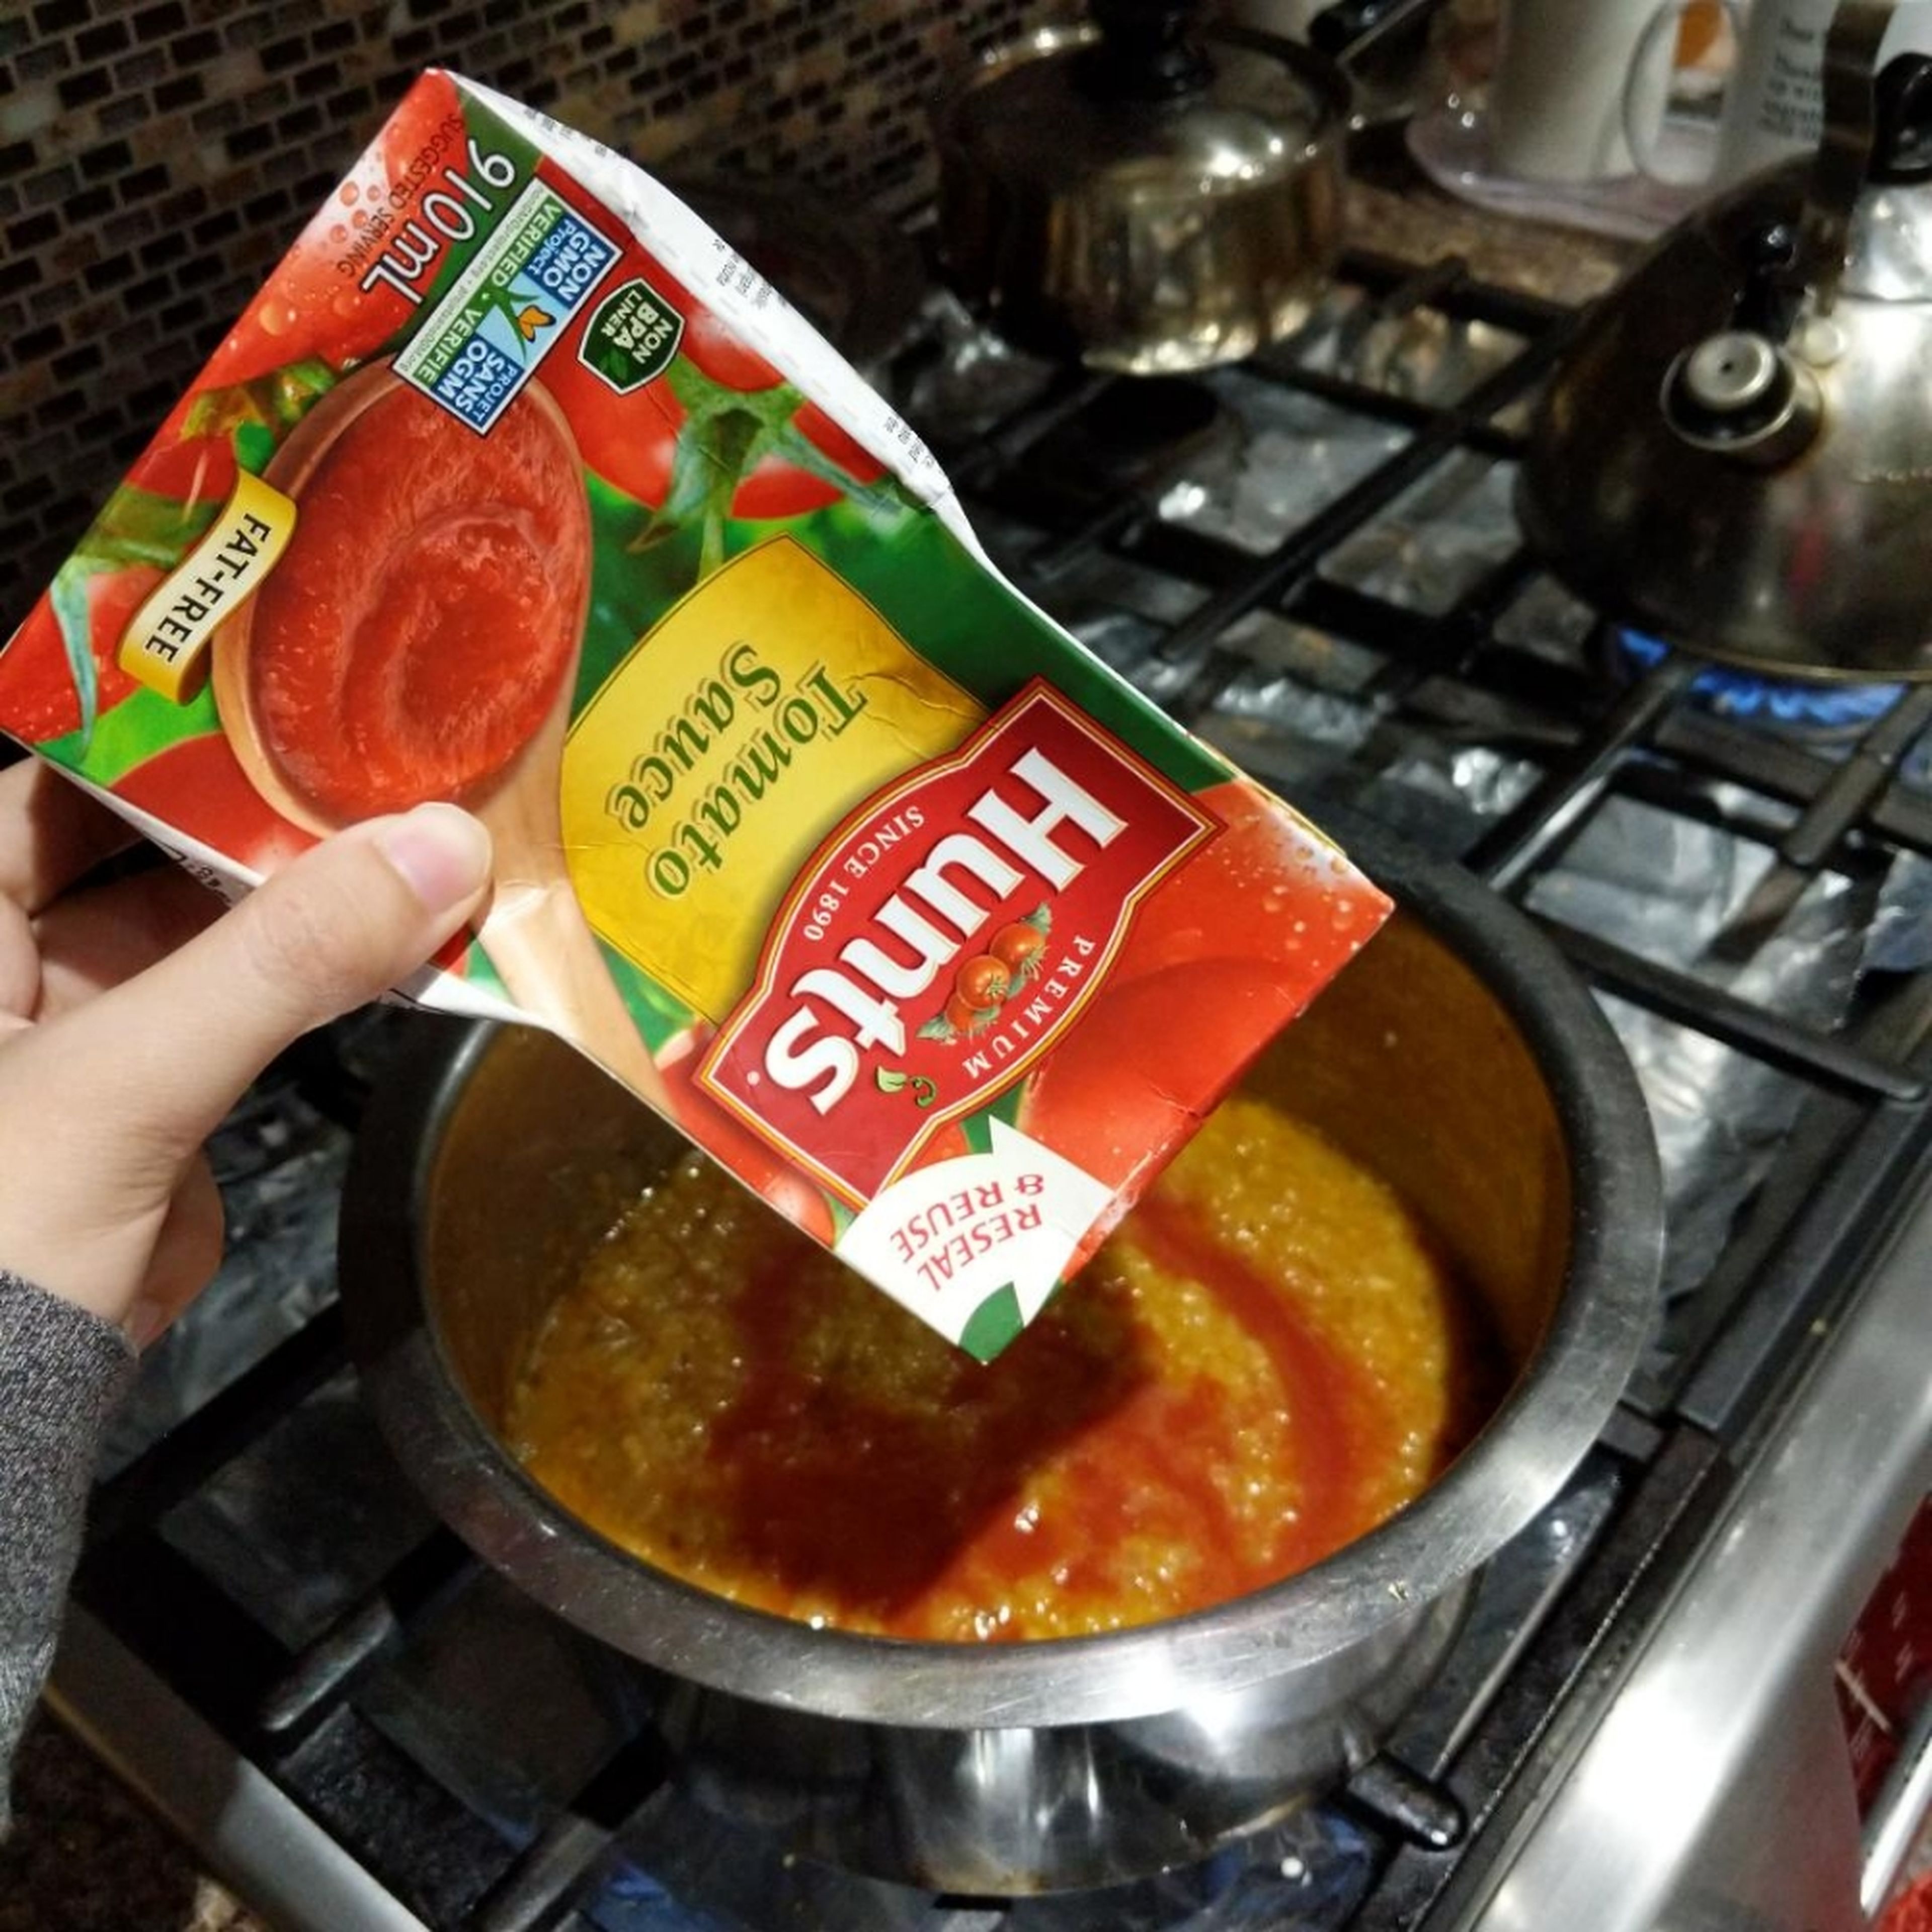 When your mixture starts to release oil, add tomato paste. Cook on medium-low for 10 min